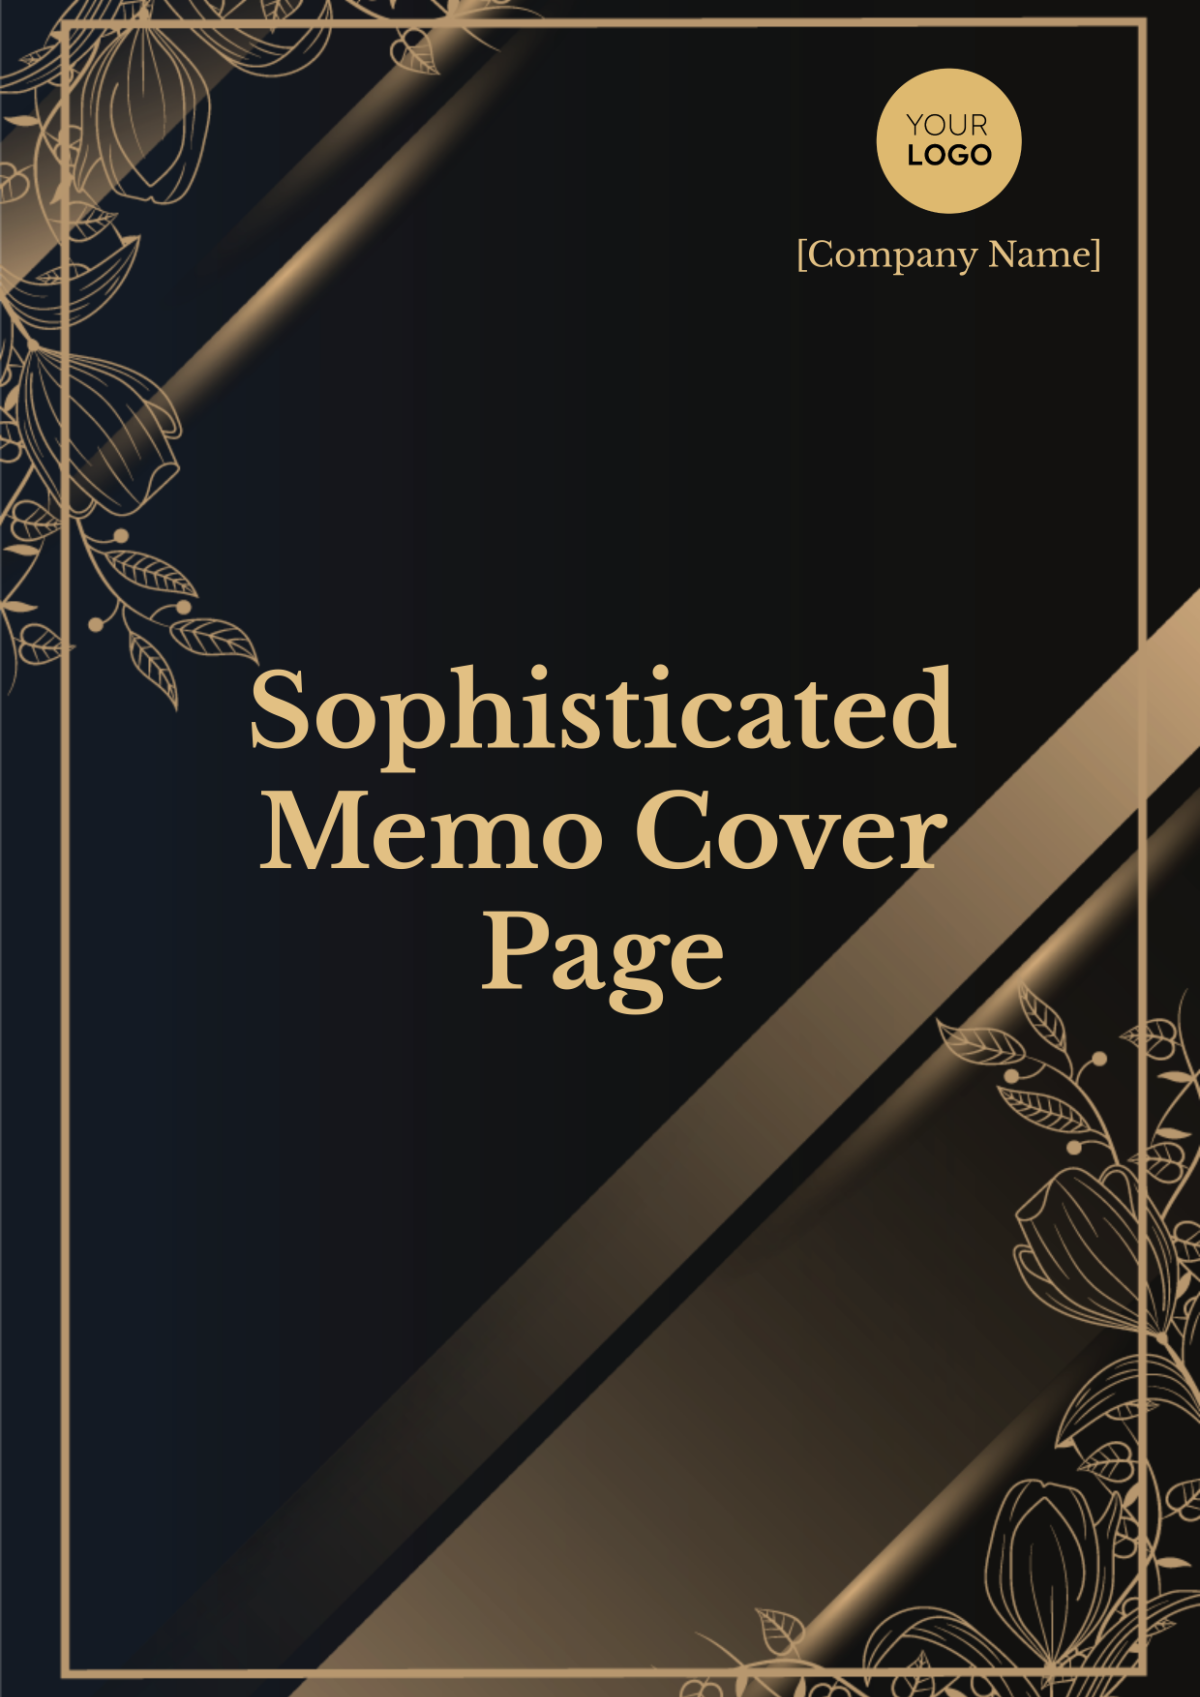 Sophisticated Memo Cover Page Template